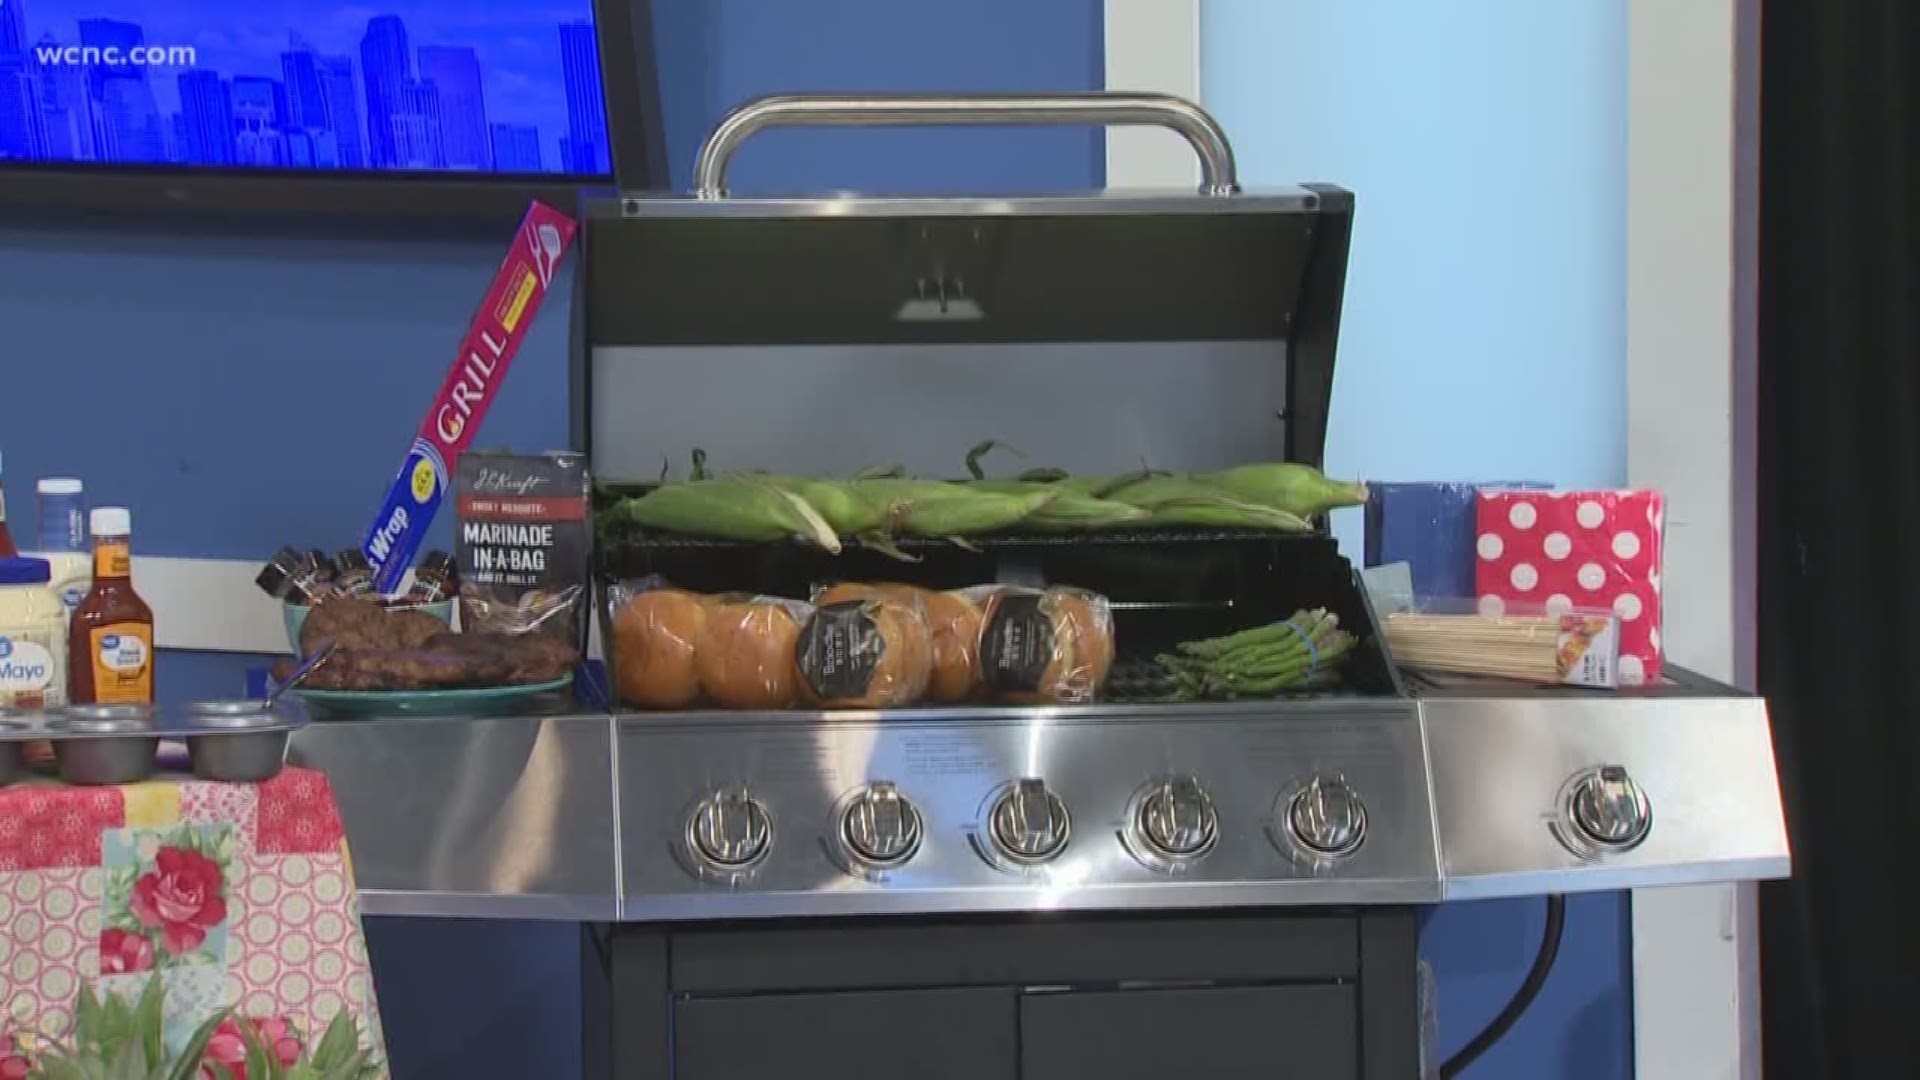 Grilling tips and hacks everyone can do! All of the ingredients and supplies are available at your local Walmart.